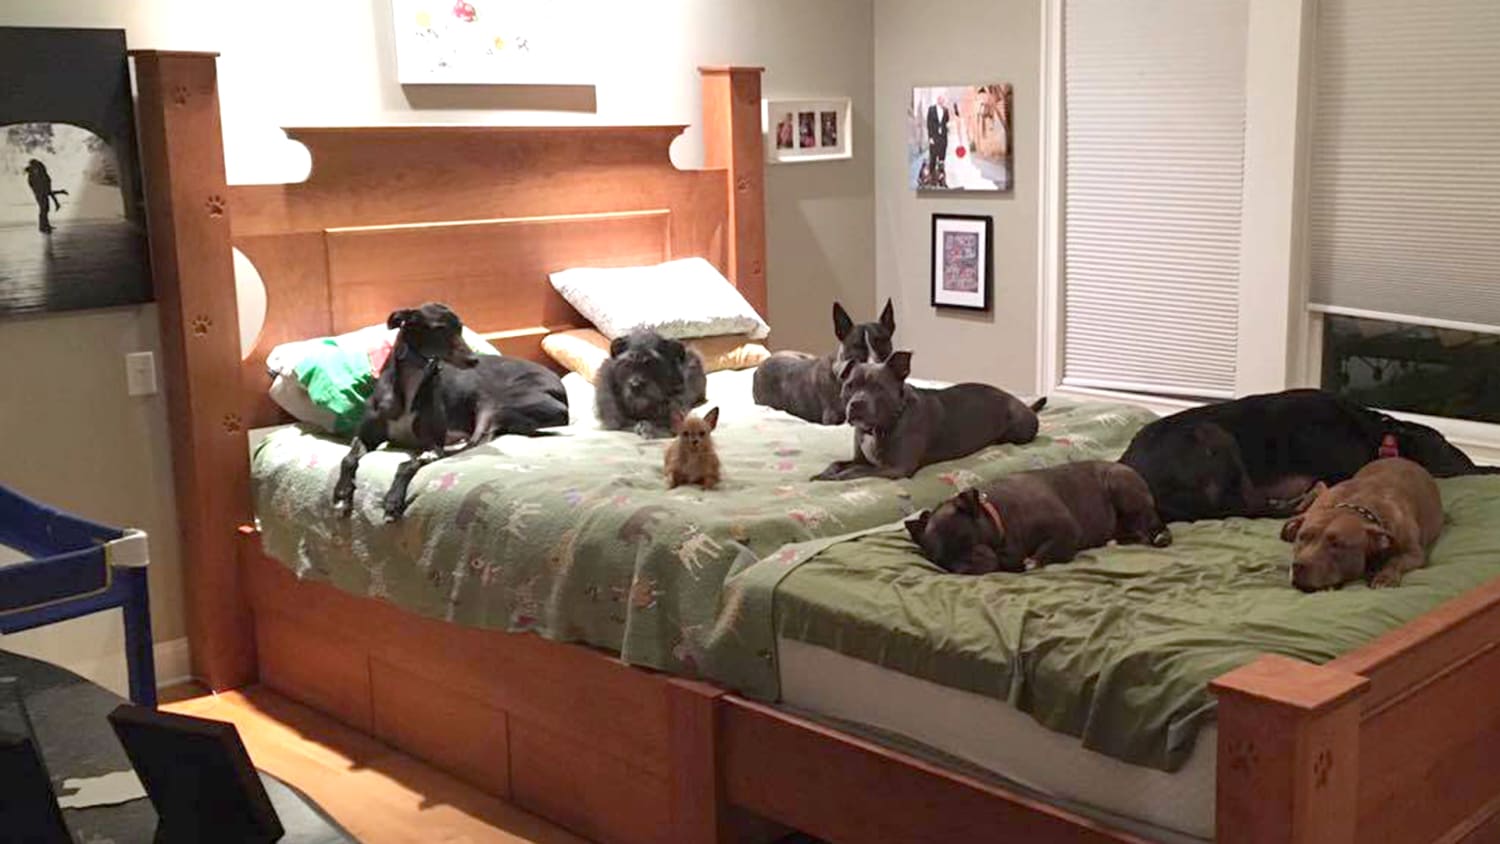 Giant Bed To Sleep Comfortably With 8 Dogs, King Size Bed Frame With Attached Dog